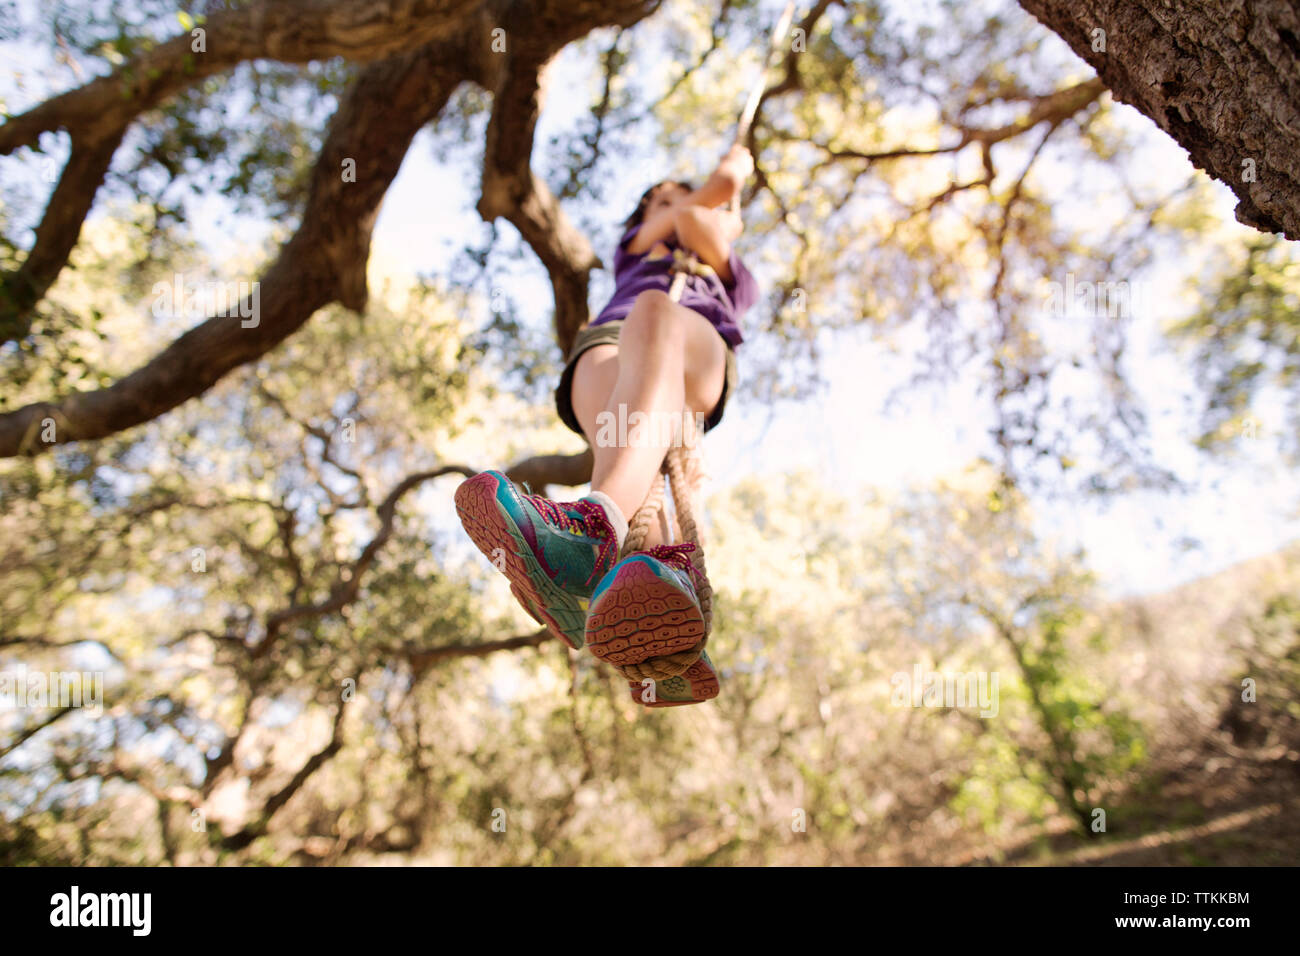 Low angle view of girl playing on rope swing in forest Stock Photo